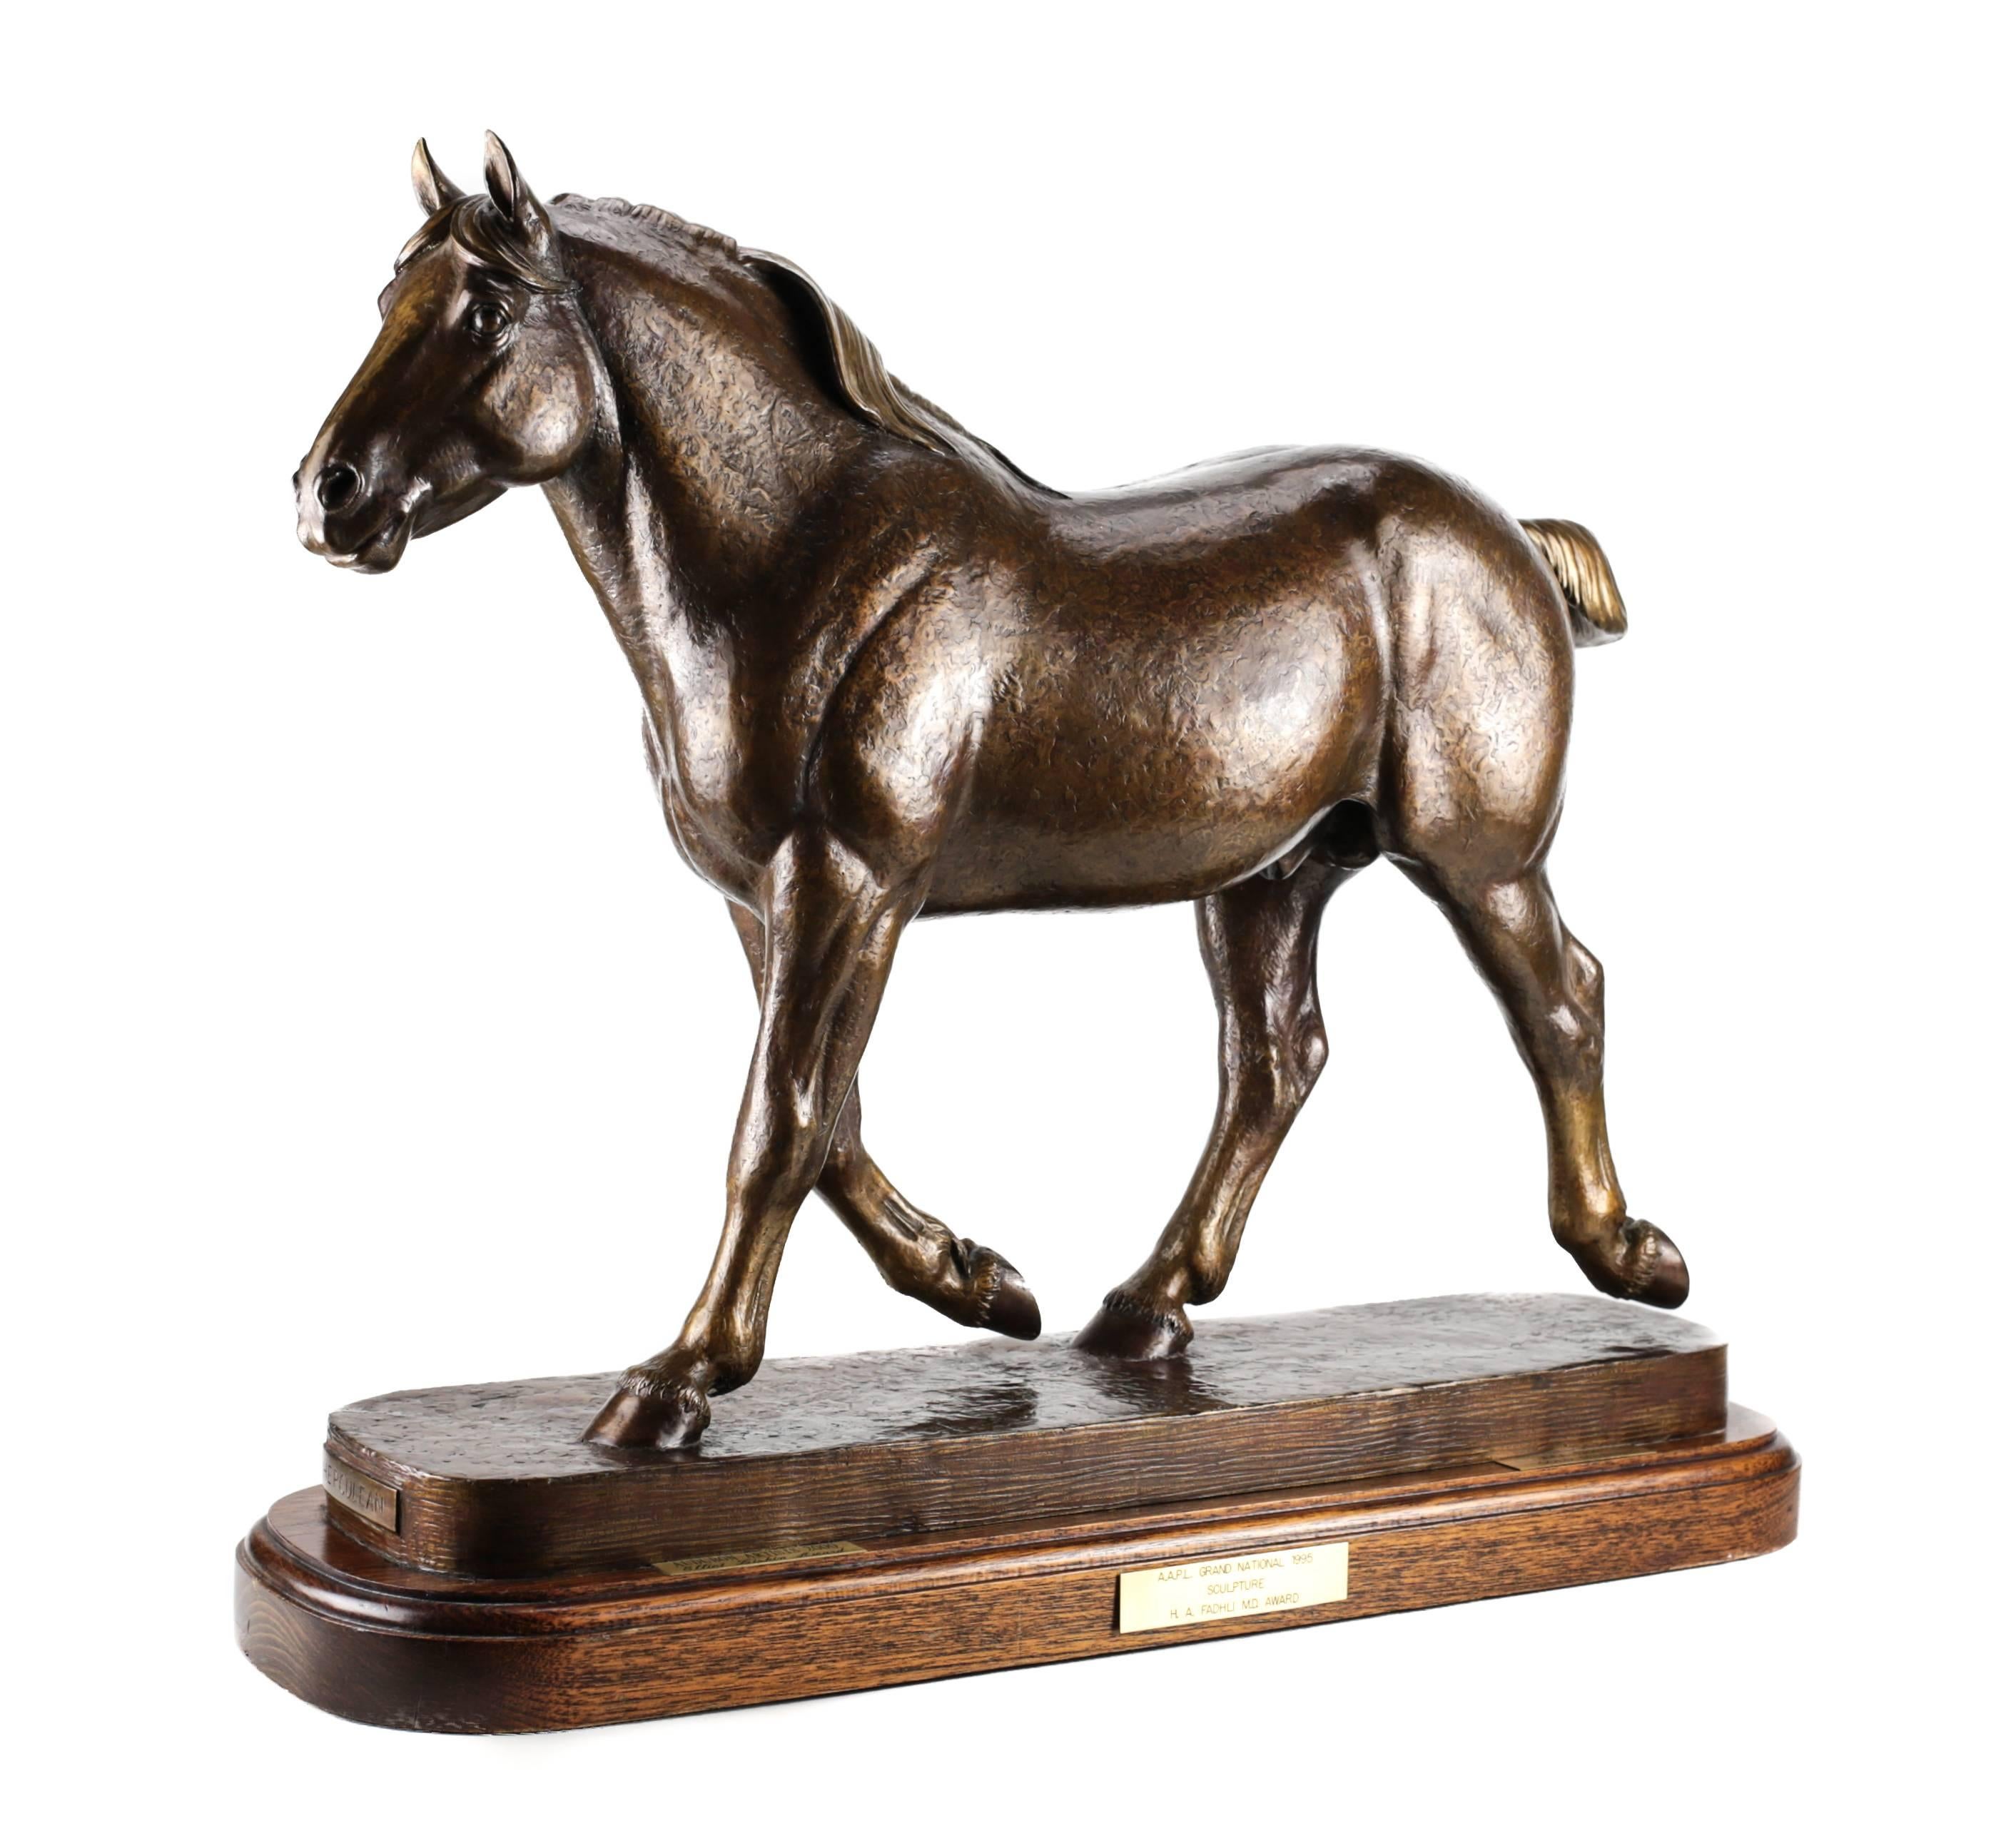 A large and formidable patinated bronze sculpture of a trotting stallion, modeled with life like qualities by American sculpture Marilyn Newmark (1928-2013.) 

This sculpture is part of a very limited edition of only five examples, the artist